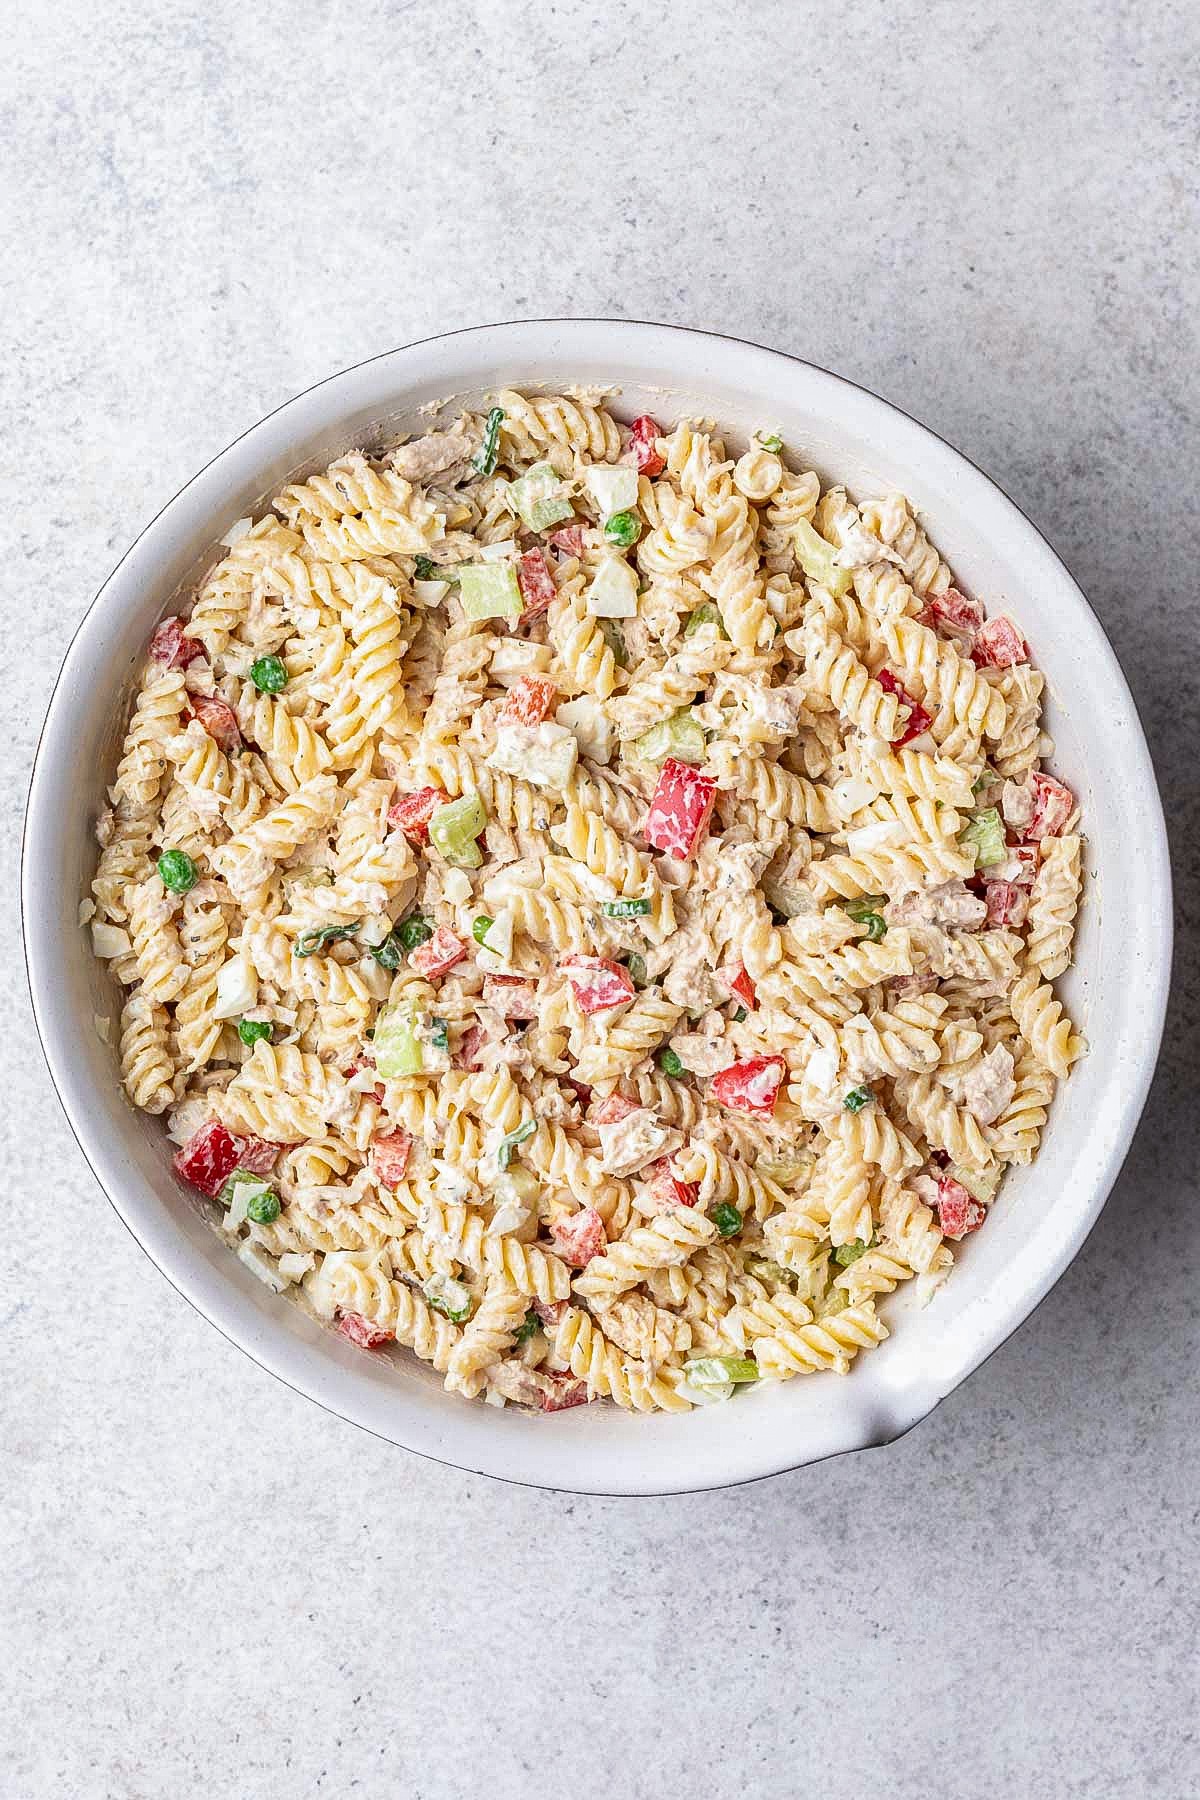 Creamy tuna pasta salad with peppers, celery, and peas.